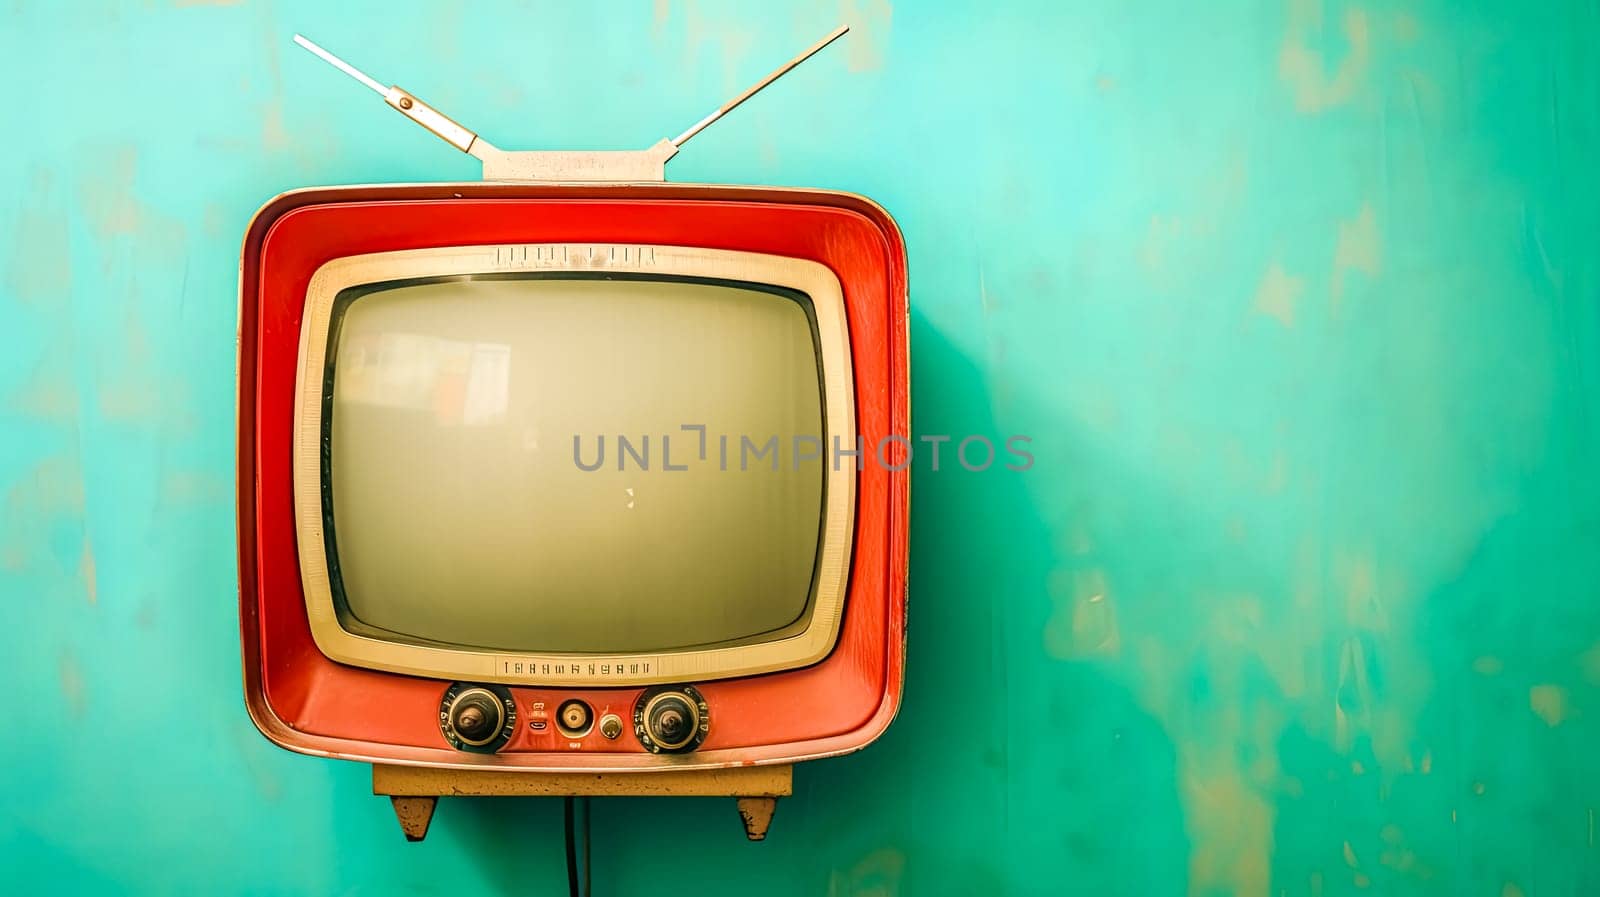 Vintage Red Television on Teal Background, copy space